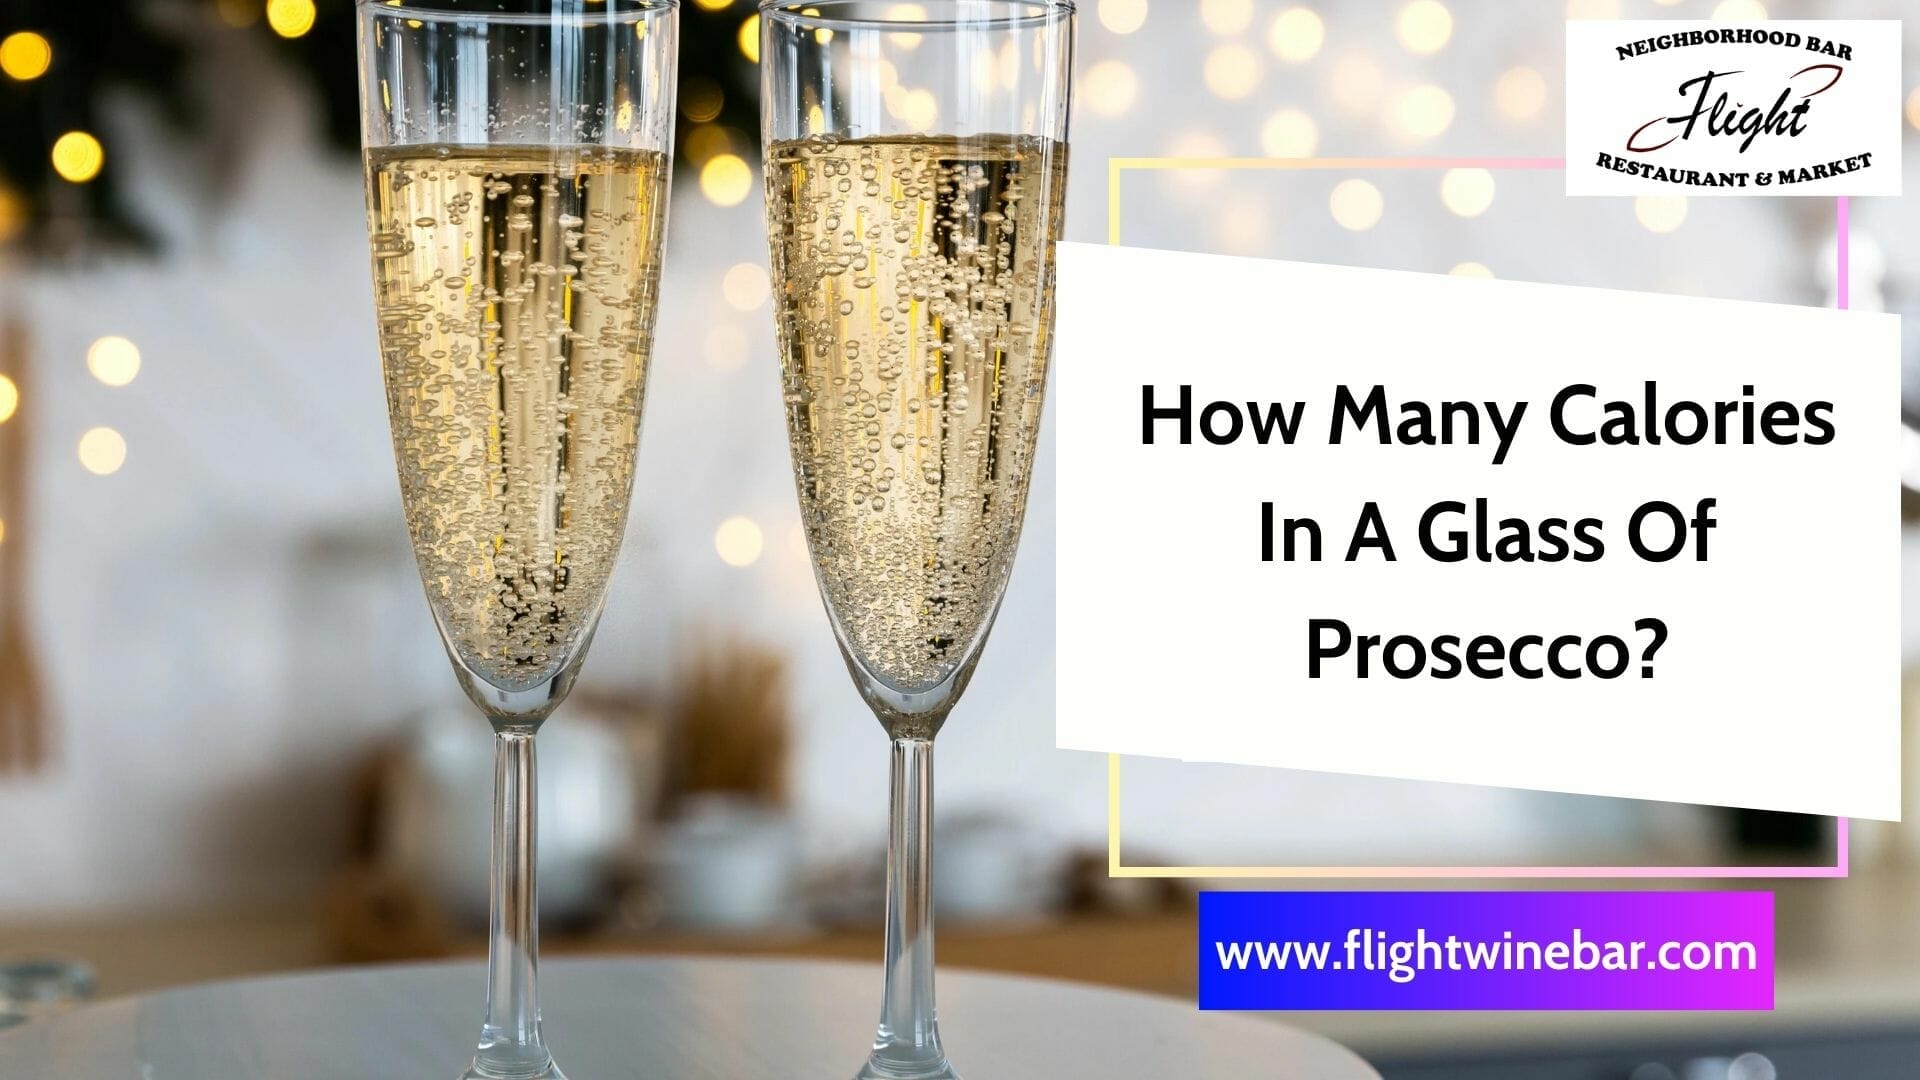 How Many Calories In A Glass Of Prosecco